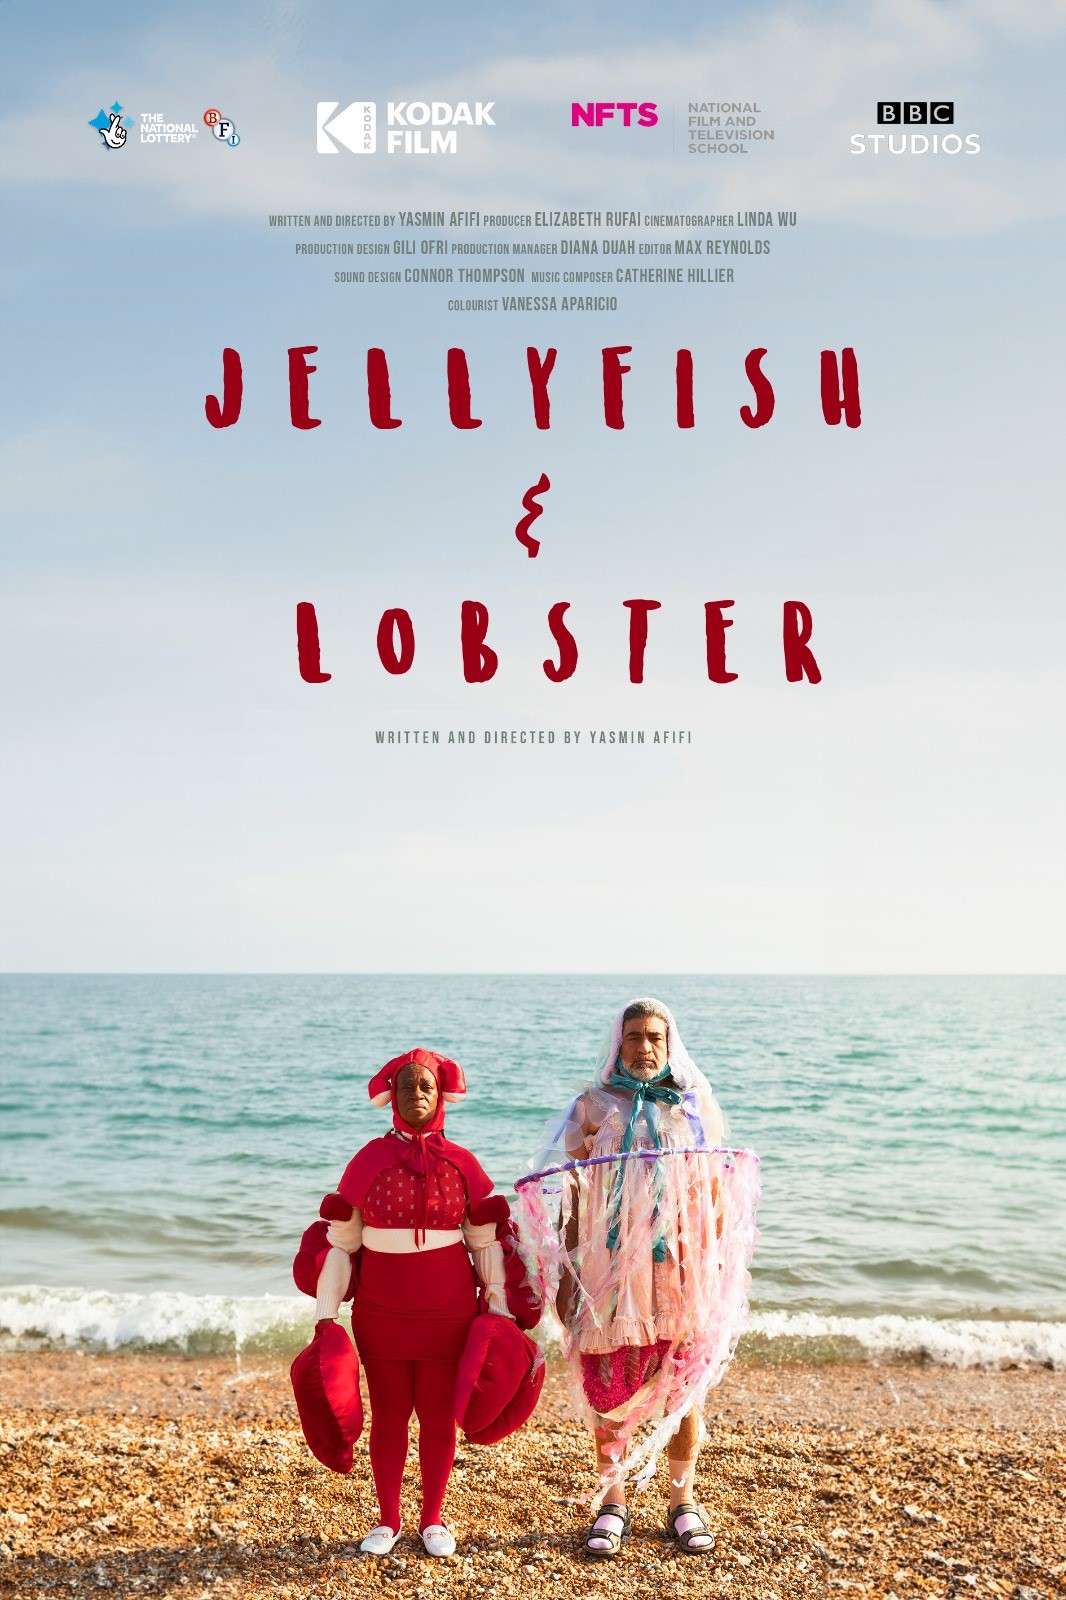 Jellyfish And Lobster packshot